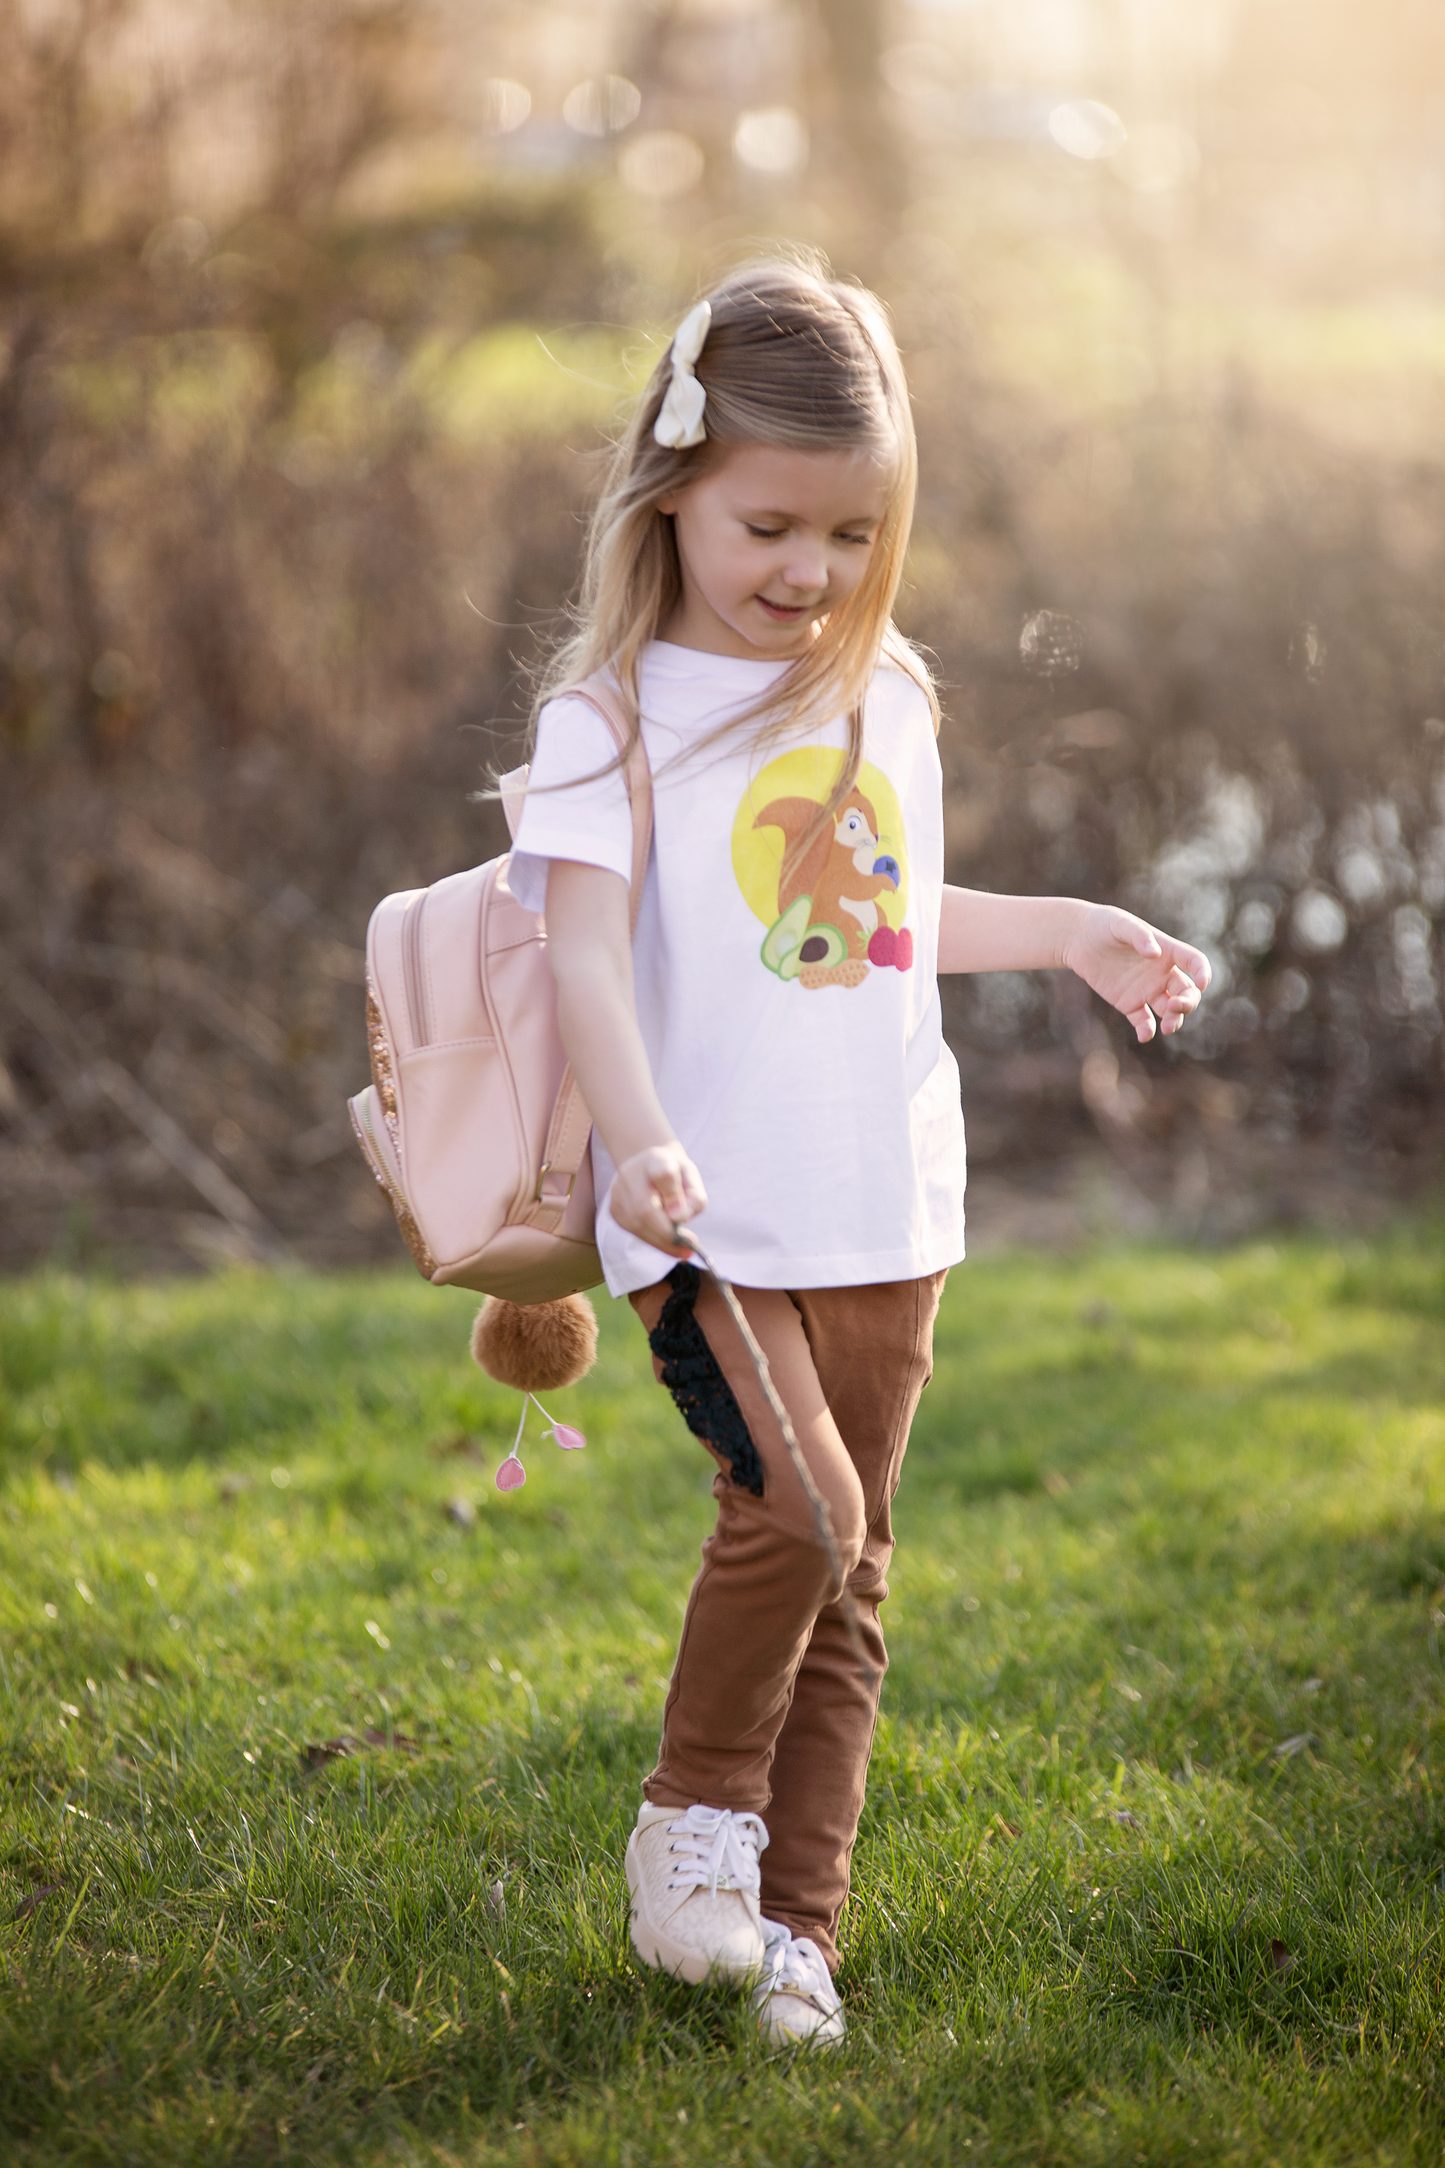 Squirrel White Organic Cotton T-Shirt for Kids: Sustainable and Stylish T-Shirt Inspired by the Playful Squirrels of Hyde Park